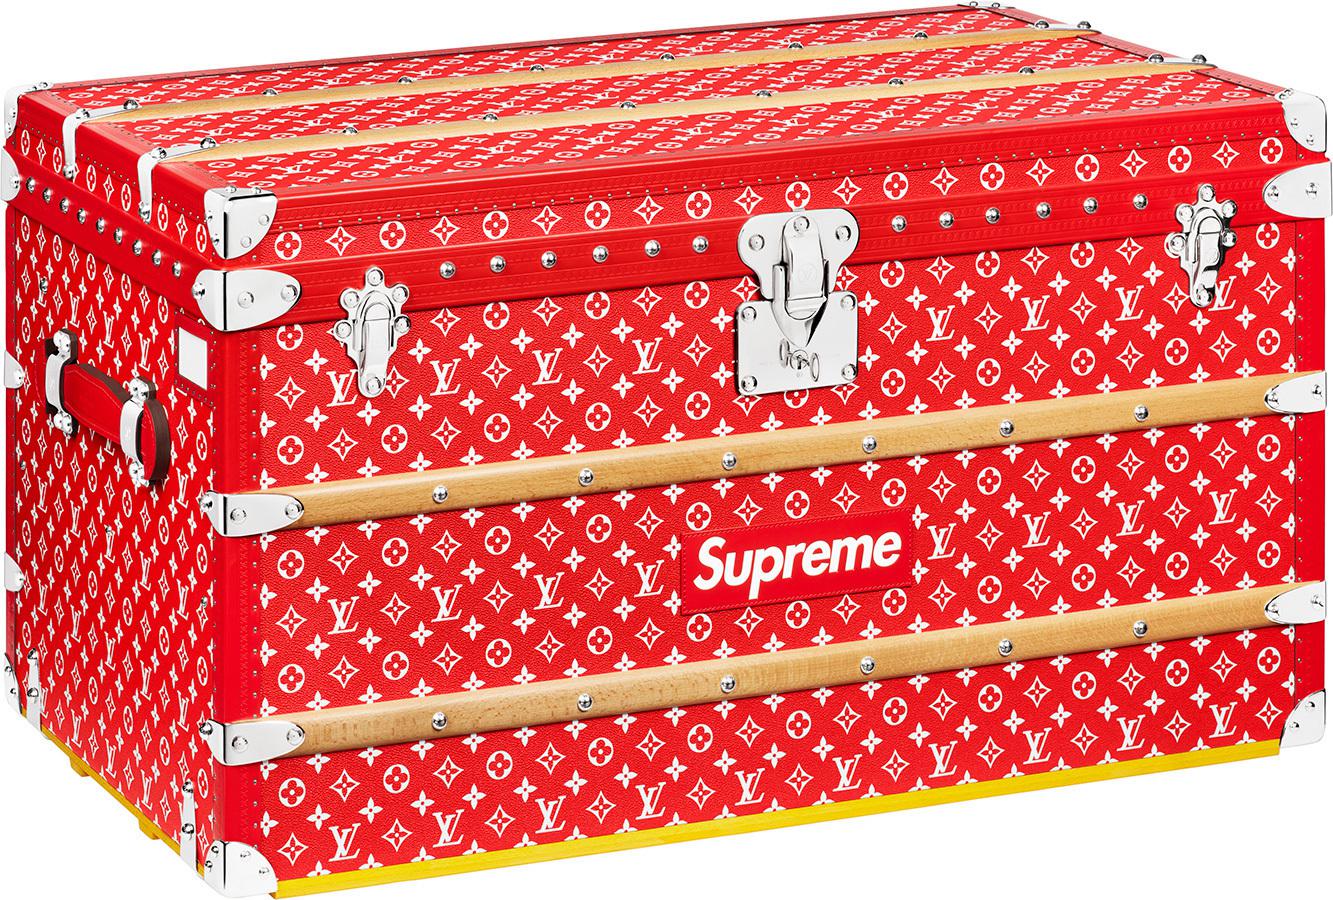 Lyst - Supreme Louis Vuitton X Malle Courrier Trunk Monogram 90 Red in Red